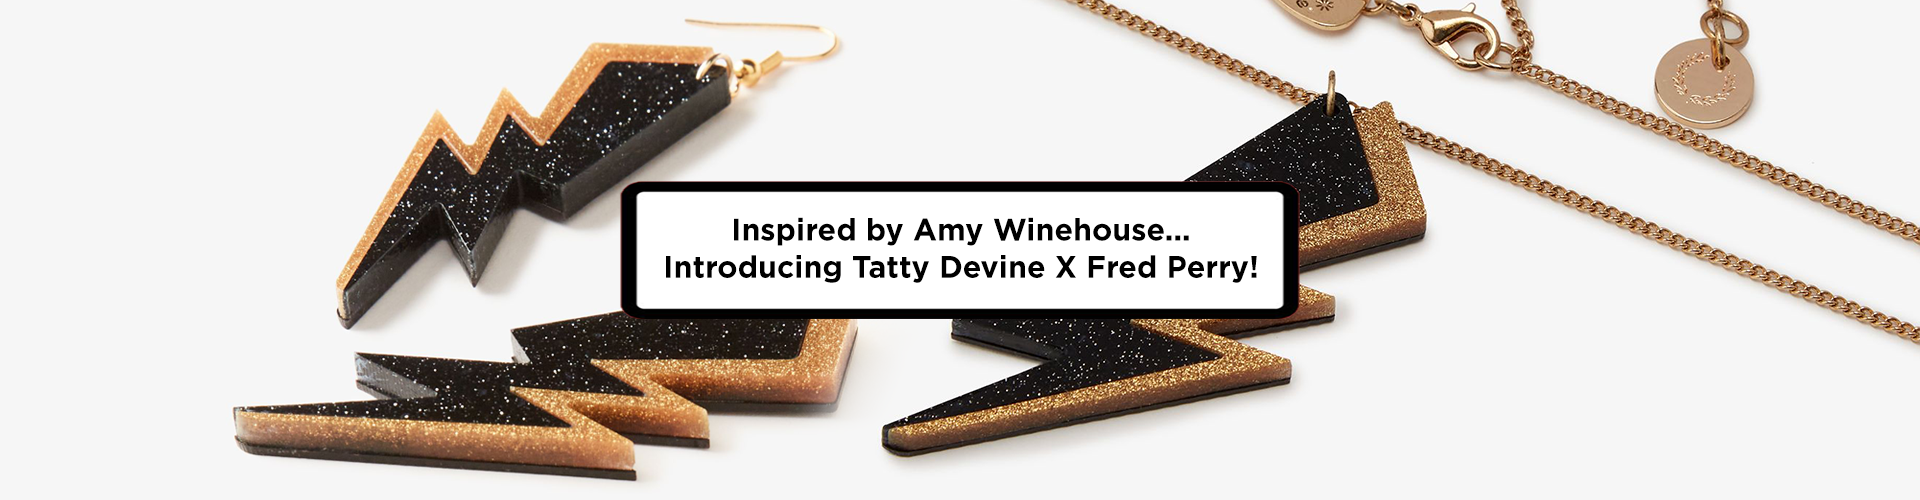 Inspired by Amy Winehouse...Introducing Tatty Devine X Fred Perry!